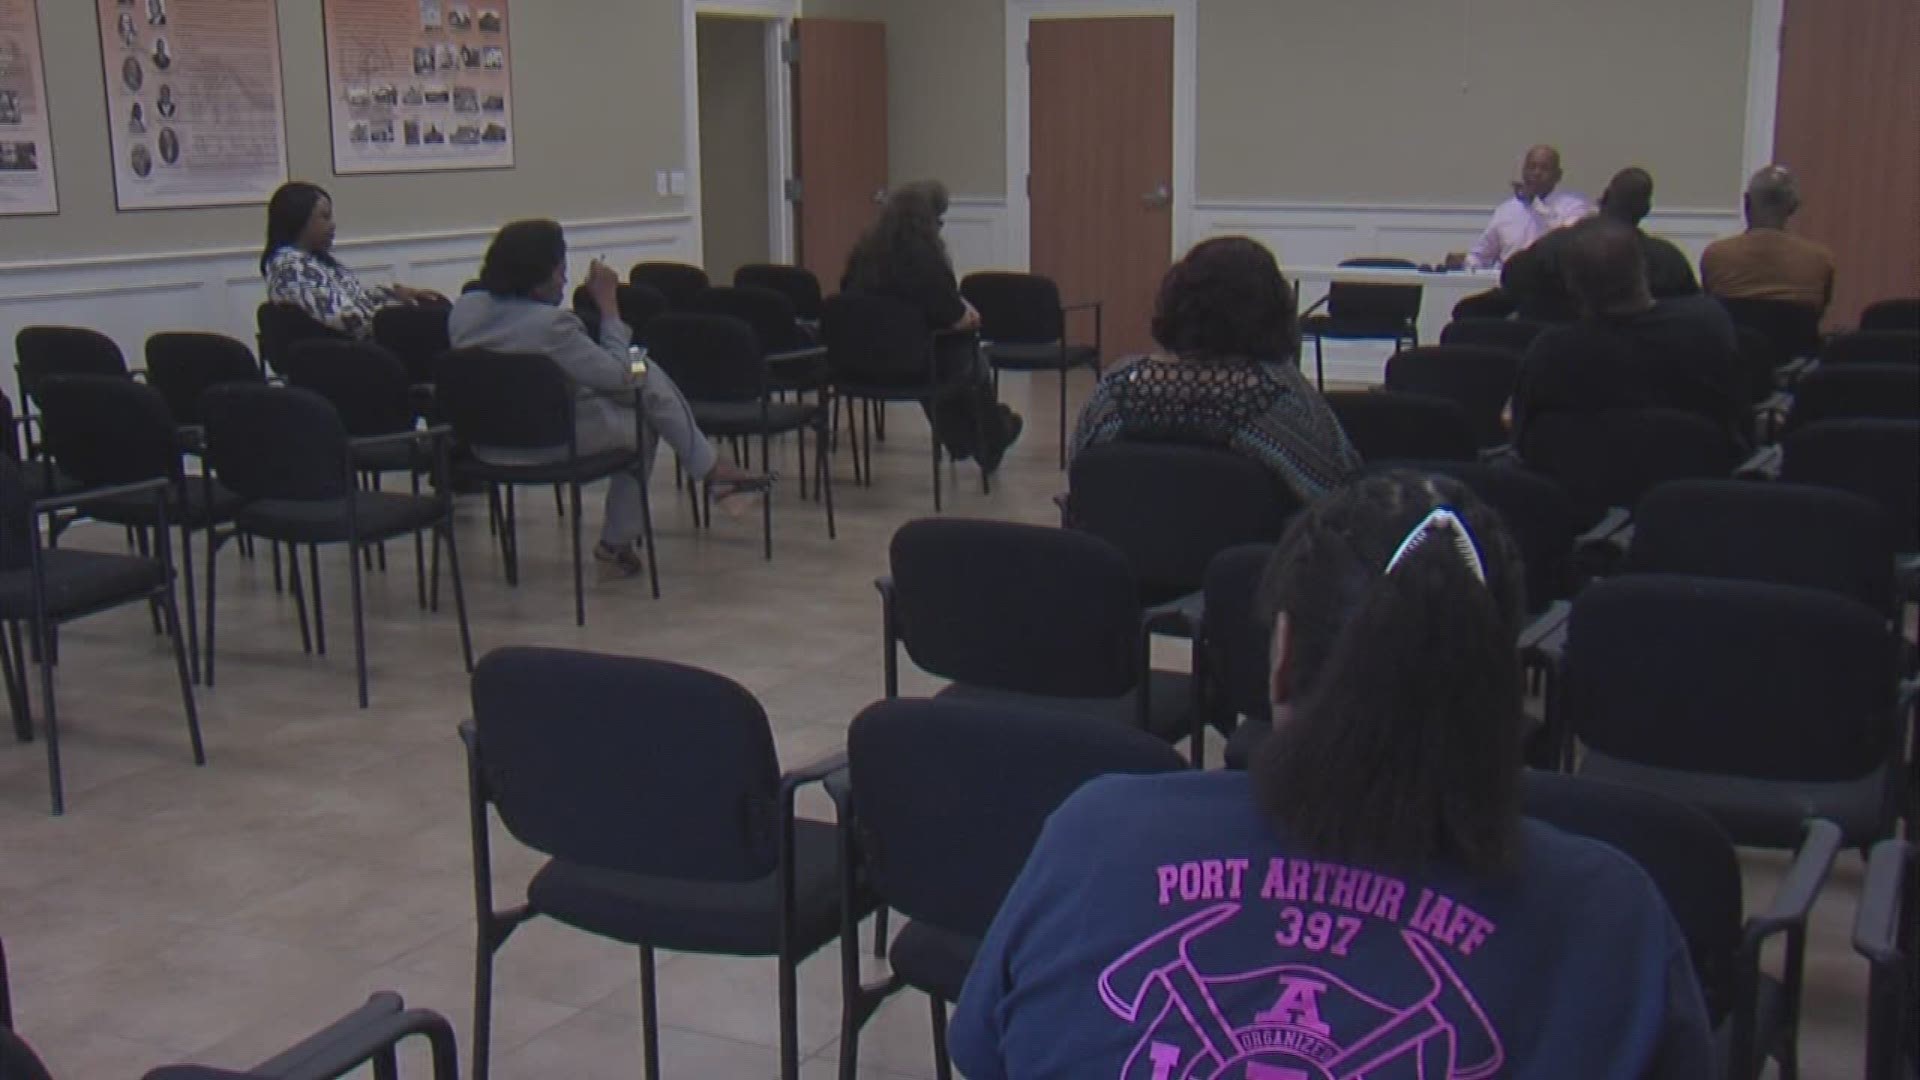 Some Port Arthur residents and city council members met to discuss the German Pellets silo situation on Thursday